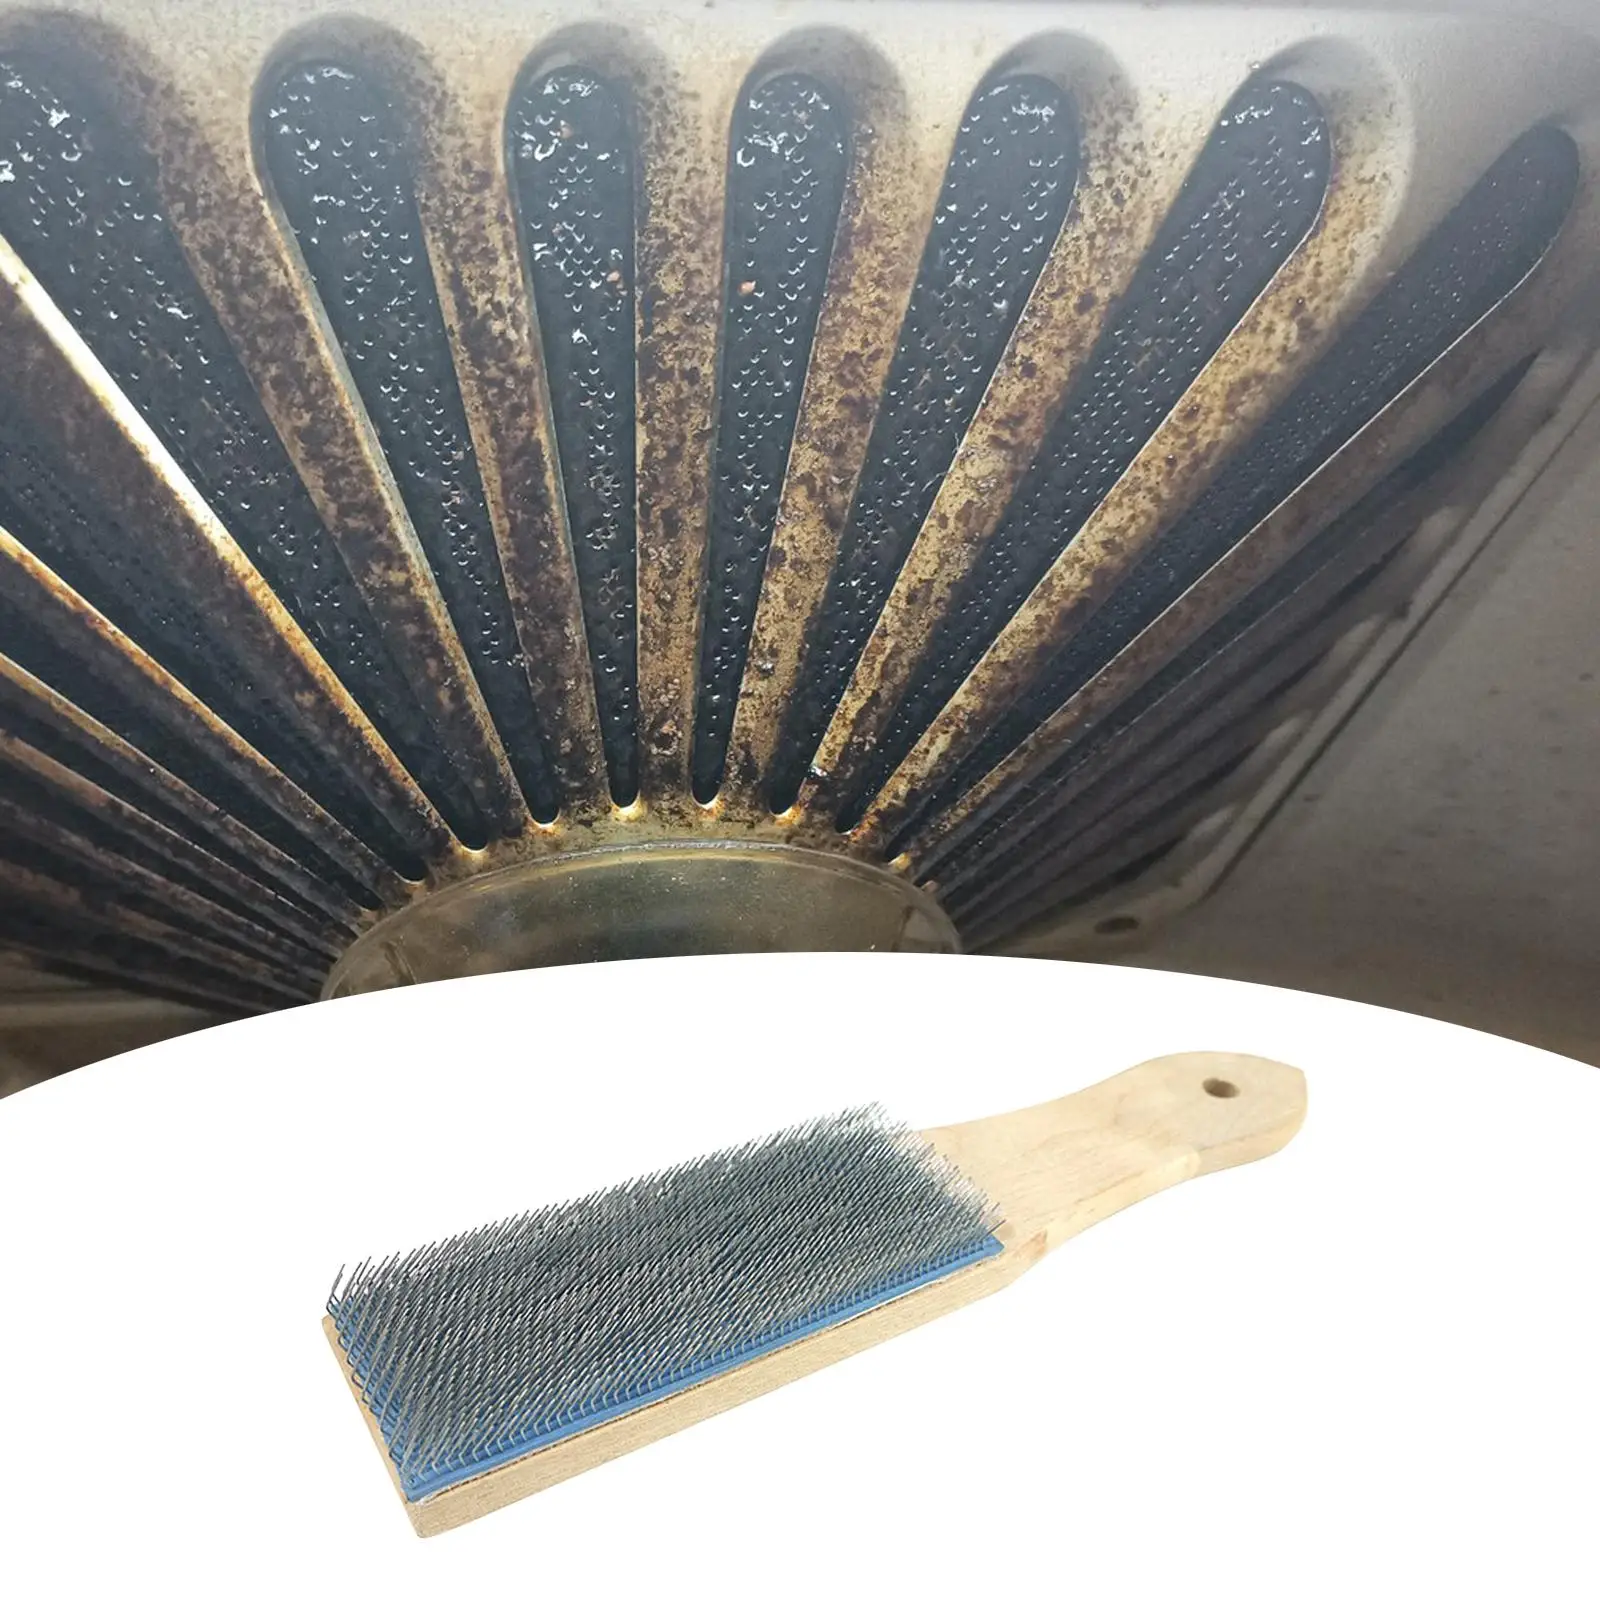 Carded File Brush Convenient Grip File Cleaning Brush Wooden Handle Cleaner